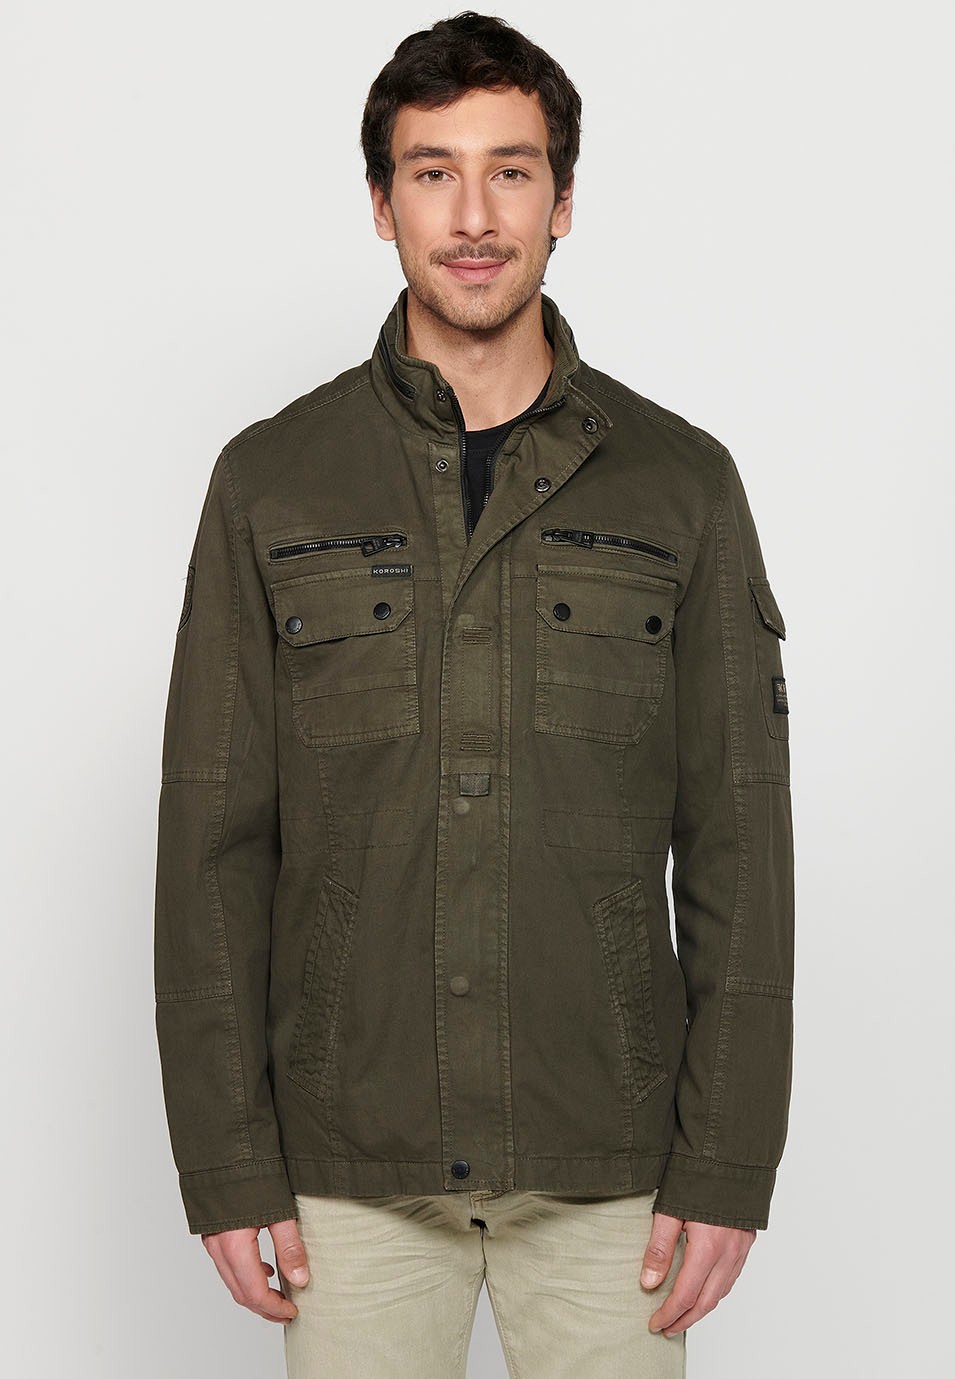 Long Jacket with Zipper Front Closure and Lapel with Stand Collar and Flap Pockets in Olive Color for Men